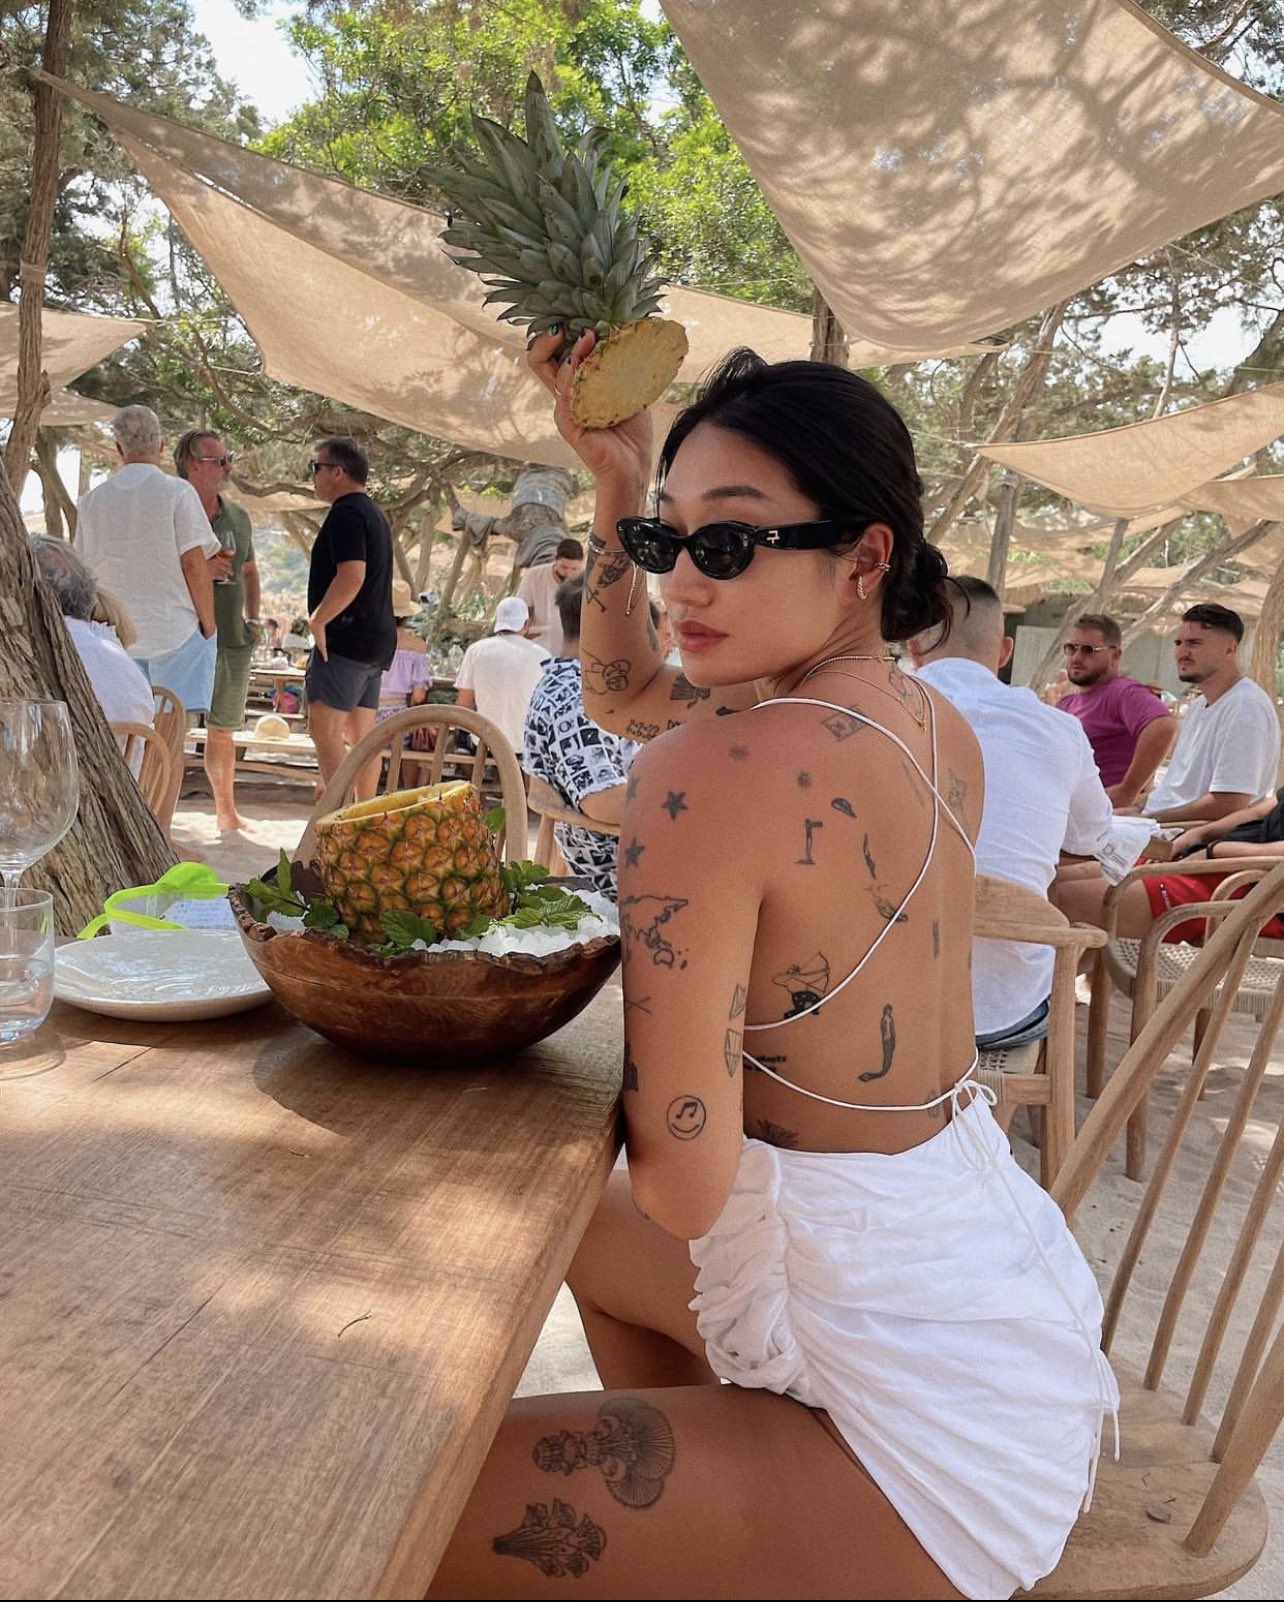 Peggy Gou on Instagram: “Hello from LV. Thanks all who joined